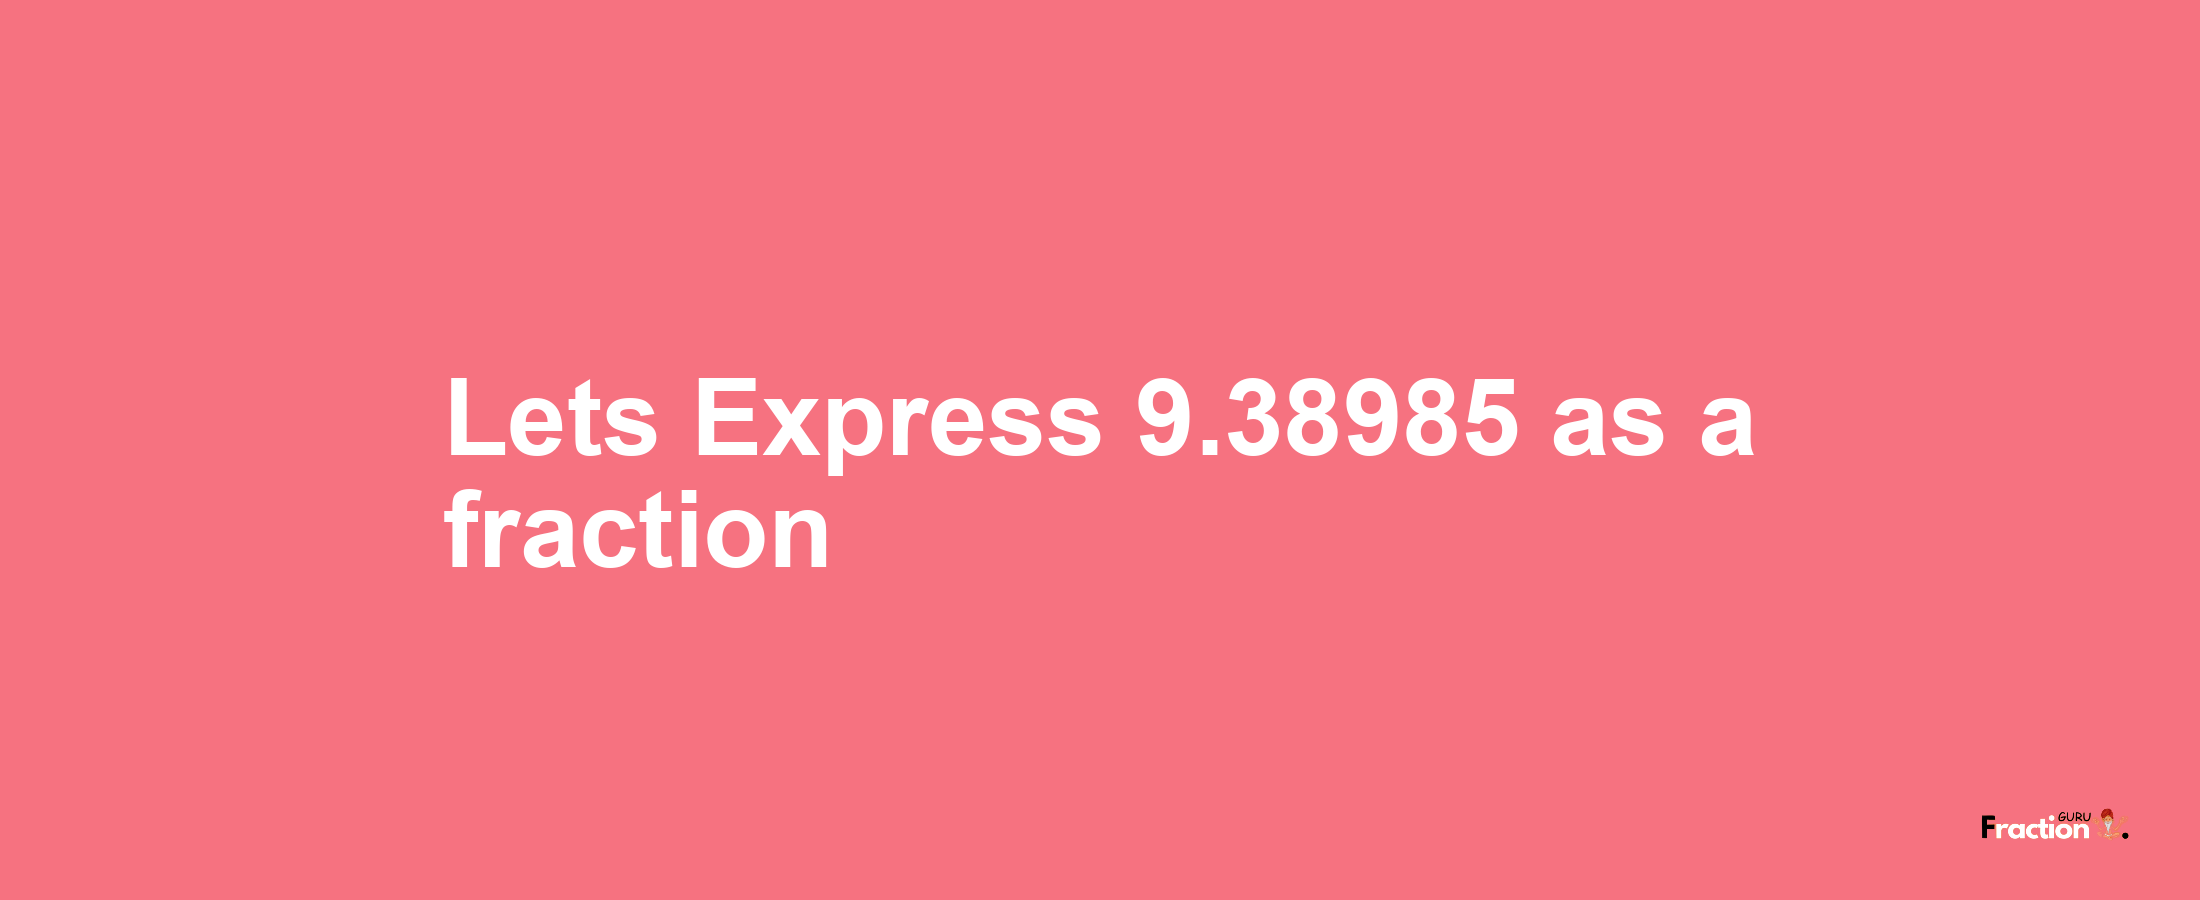 Lets Express 9.38985 as afraction